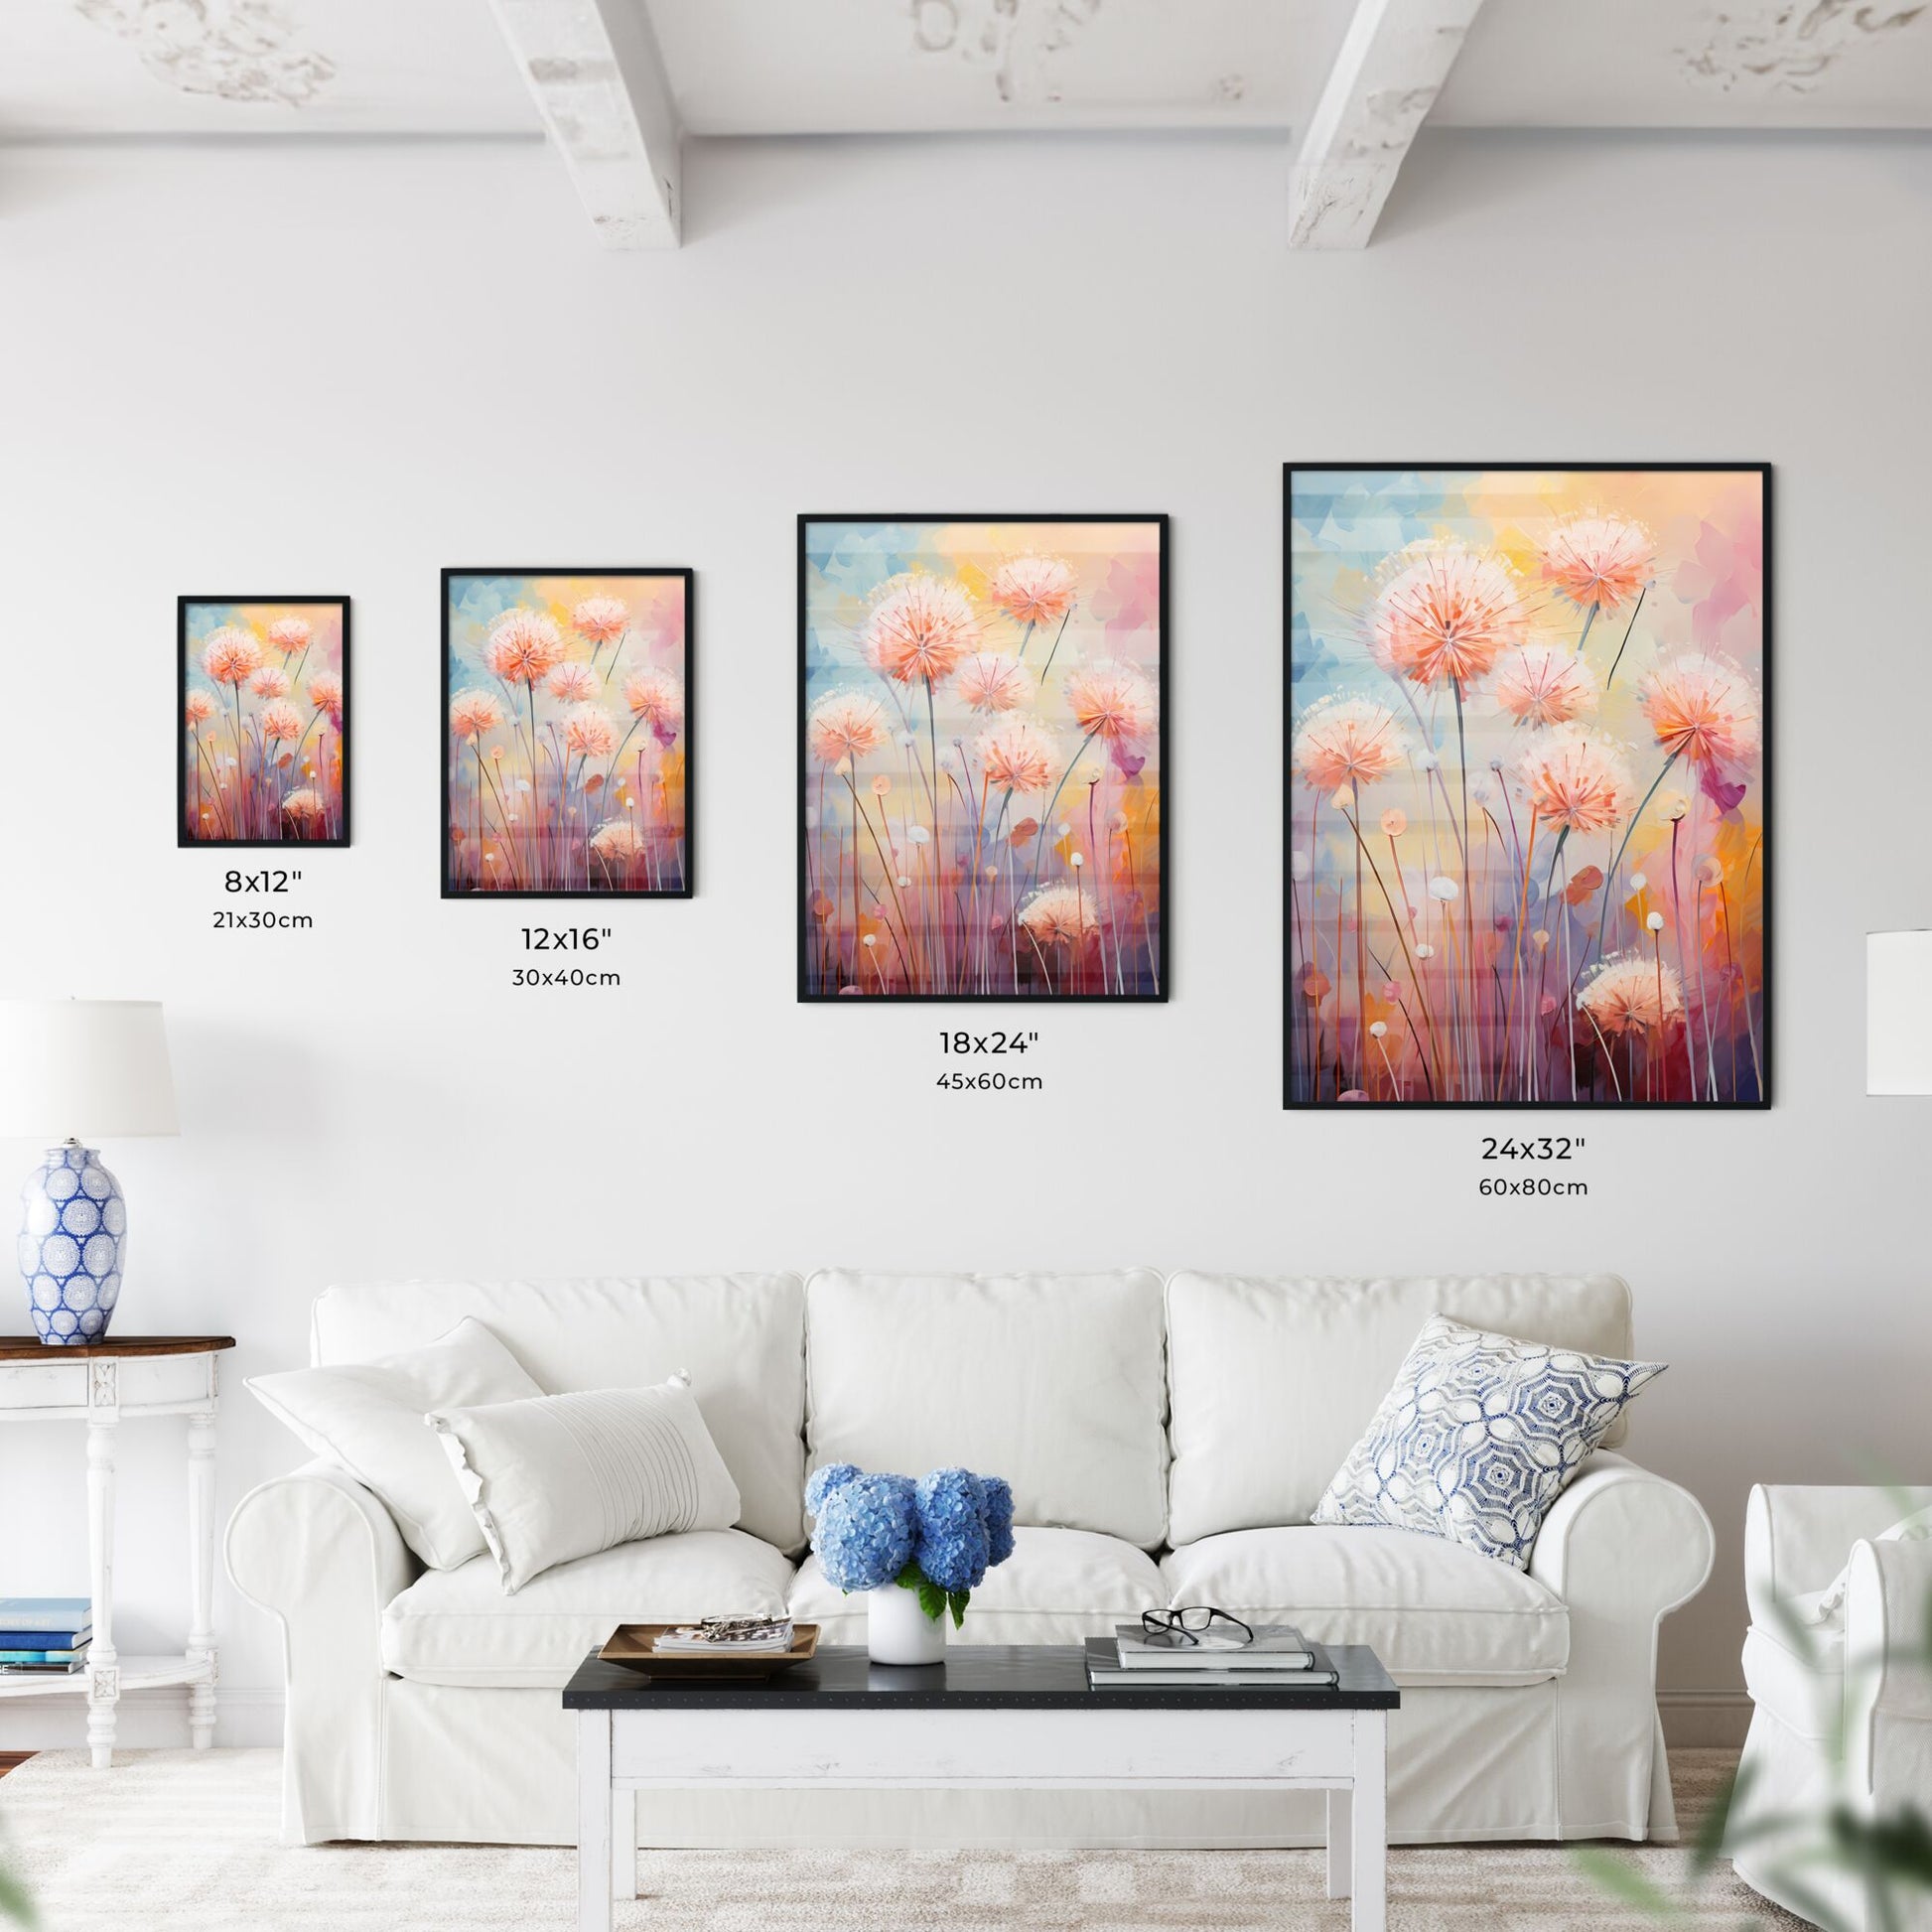 A Painting Of Flowers On A Colorful Background Default Title